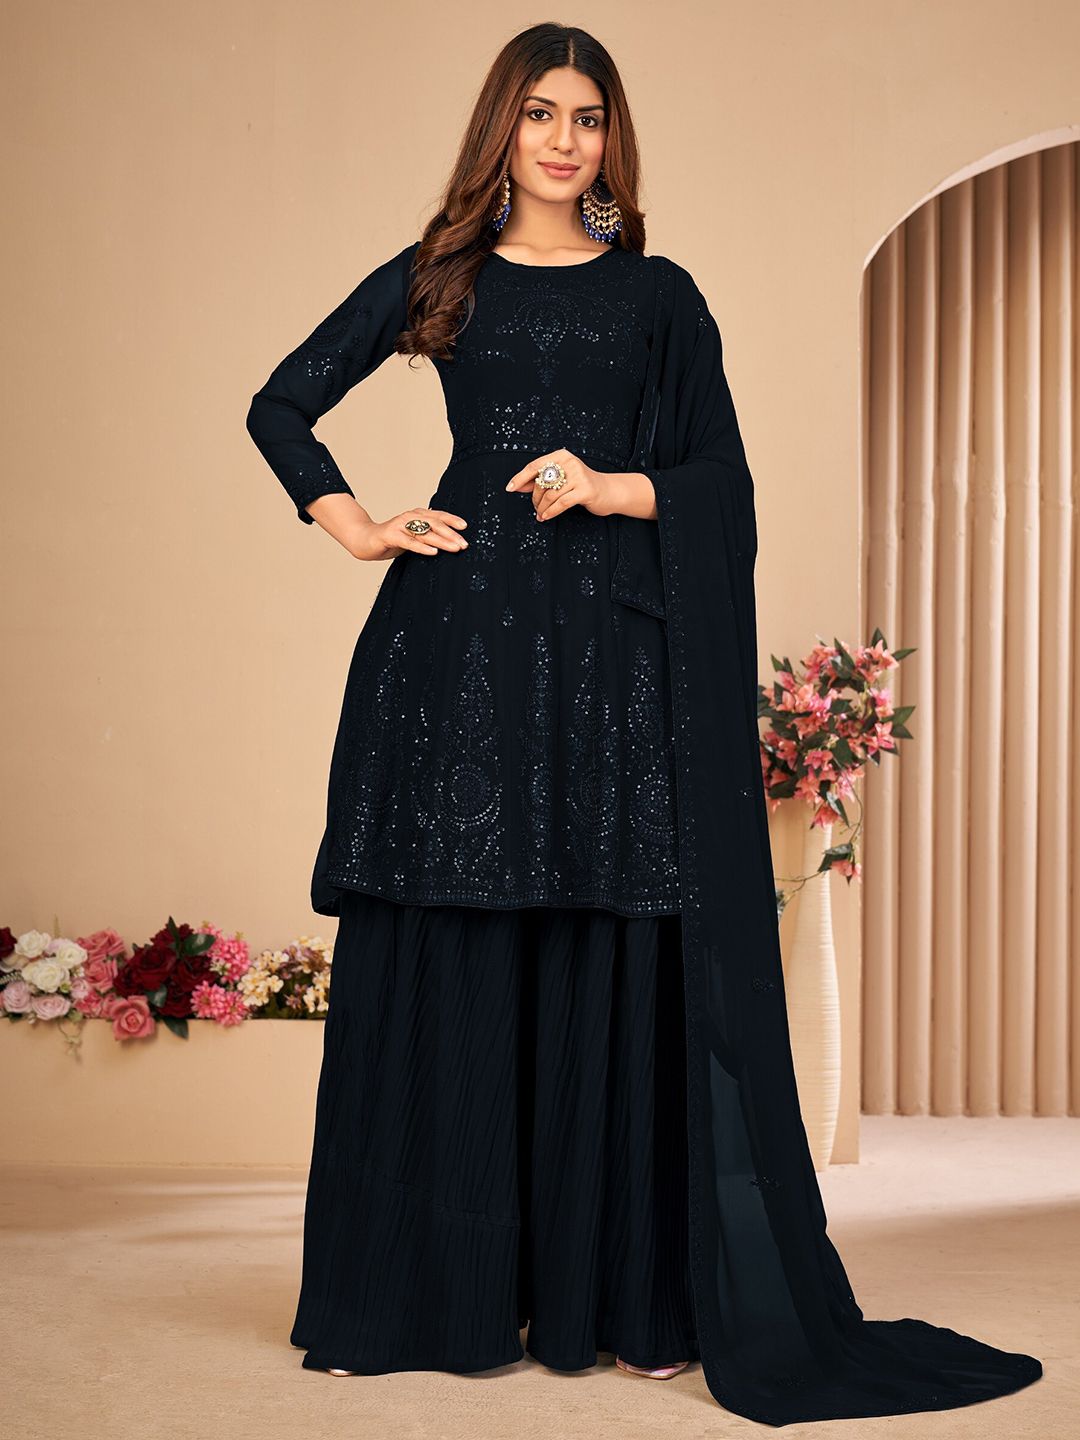 Divine International Trading Co Black Sequins Embroidered Unstitched Dress Material Price in India